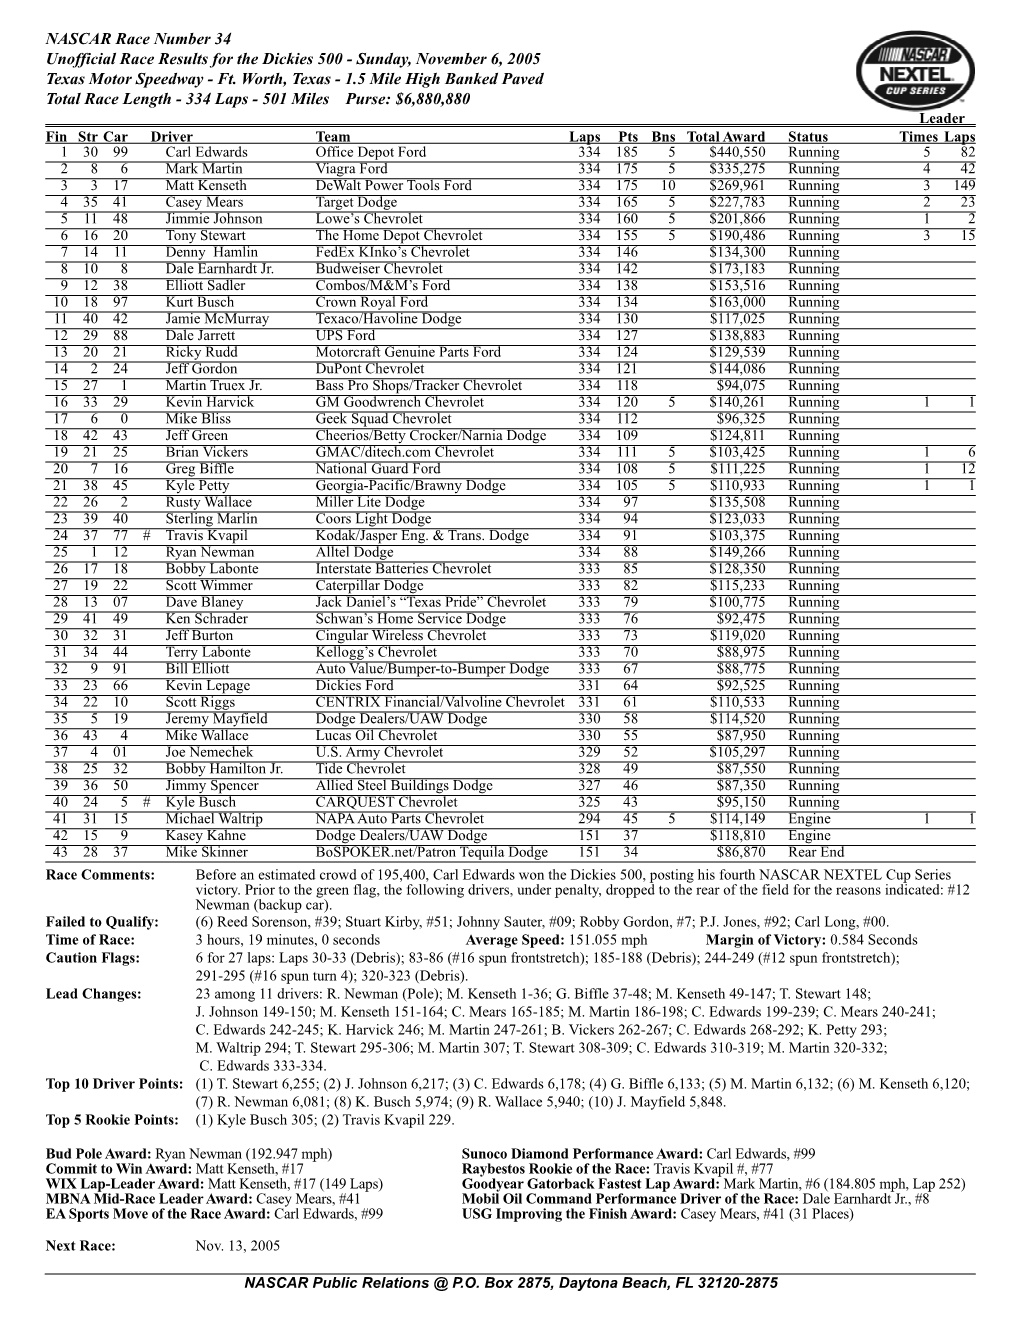 NASCAR Race Number 34 Unofficial Race Results for the Dickies 500 - Sunday, November 6, 2005 Texas Motor Speedway - Ft